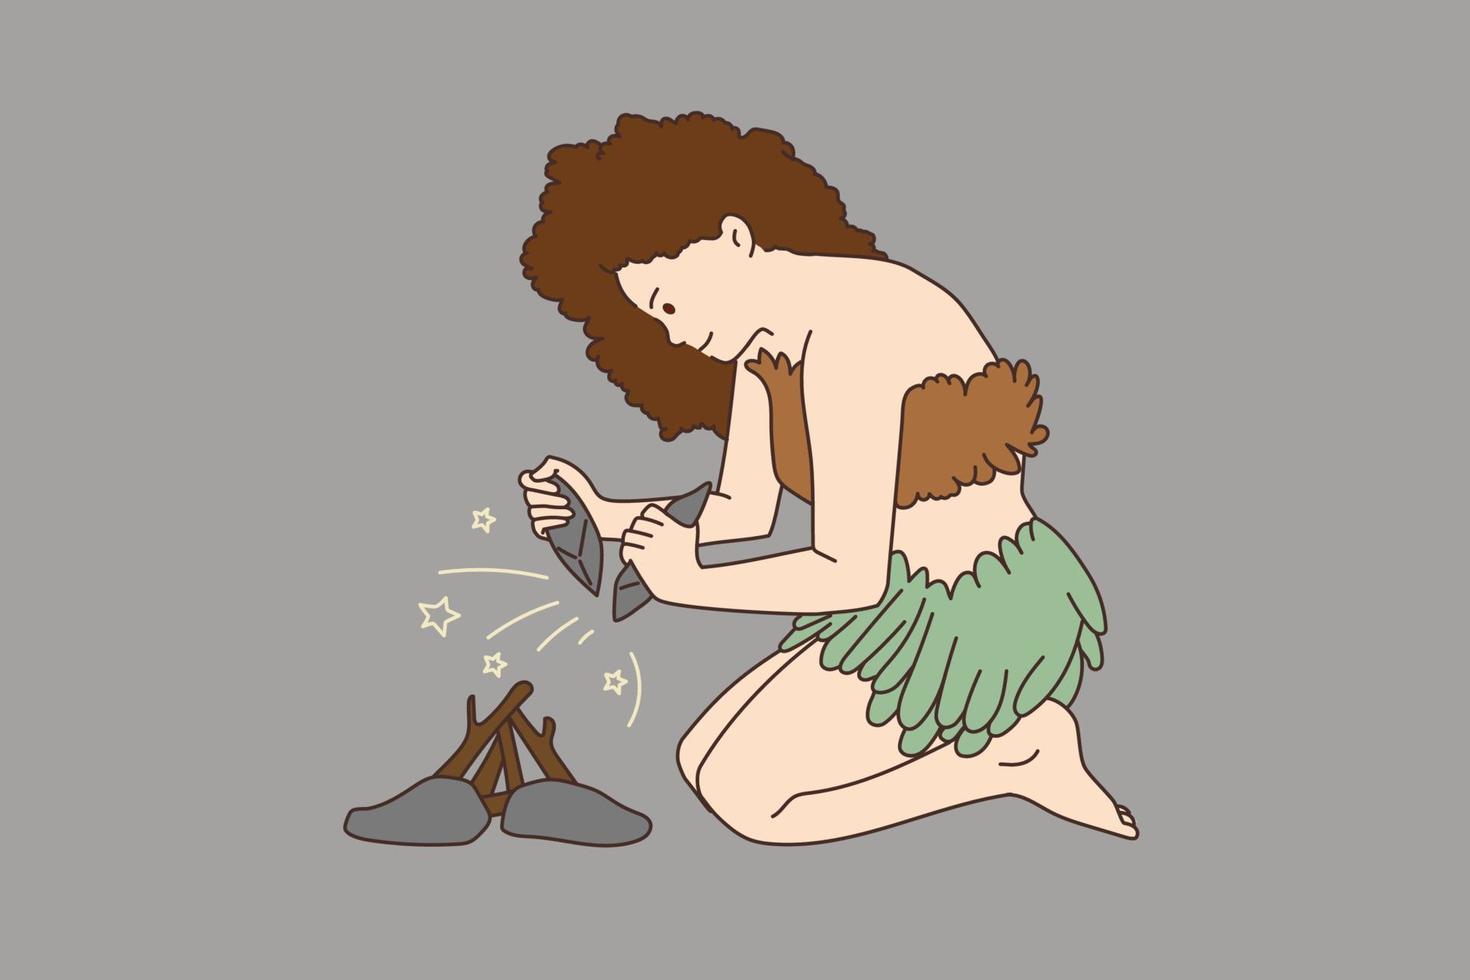 Ancient woman make receive fire from rocks, use spark to get flame for bonfire. Cartoon character female from prehistoric era survive during stone age. Ancestor habits. Flat vector illustration.